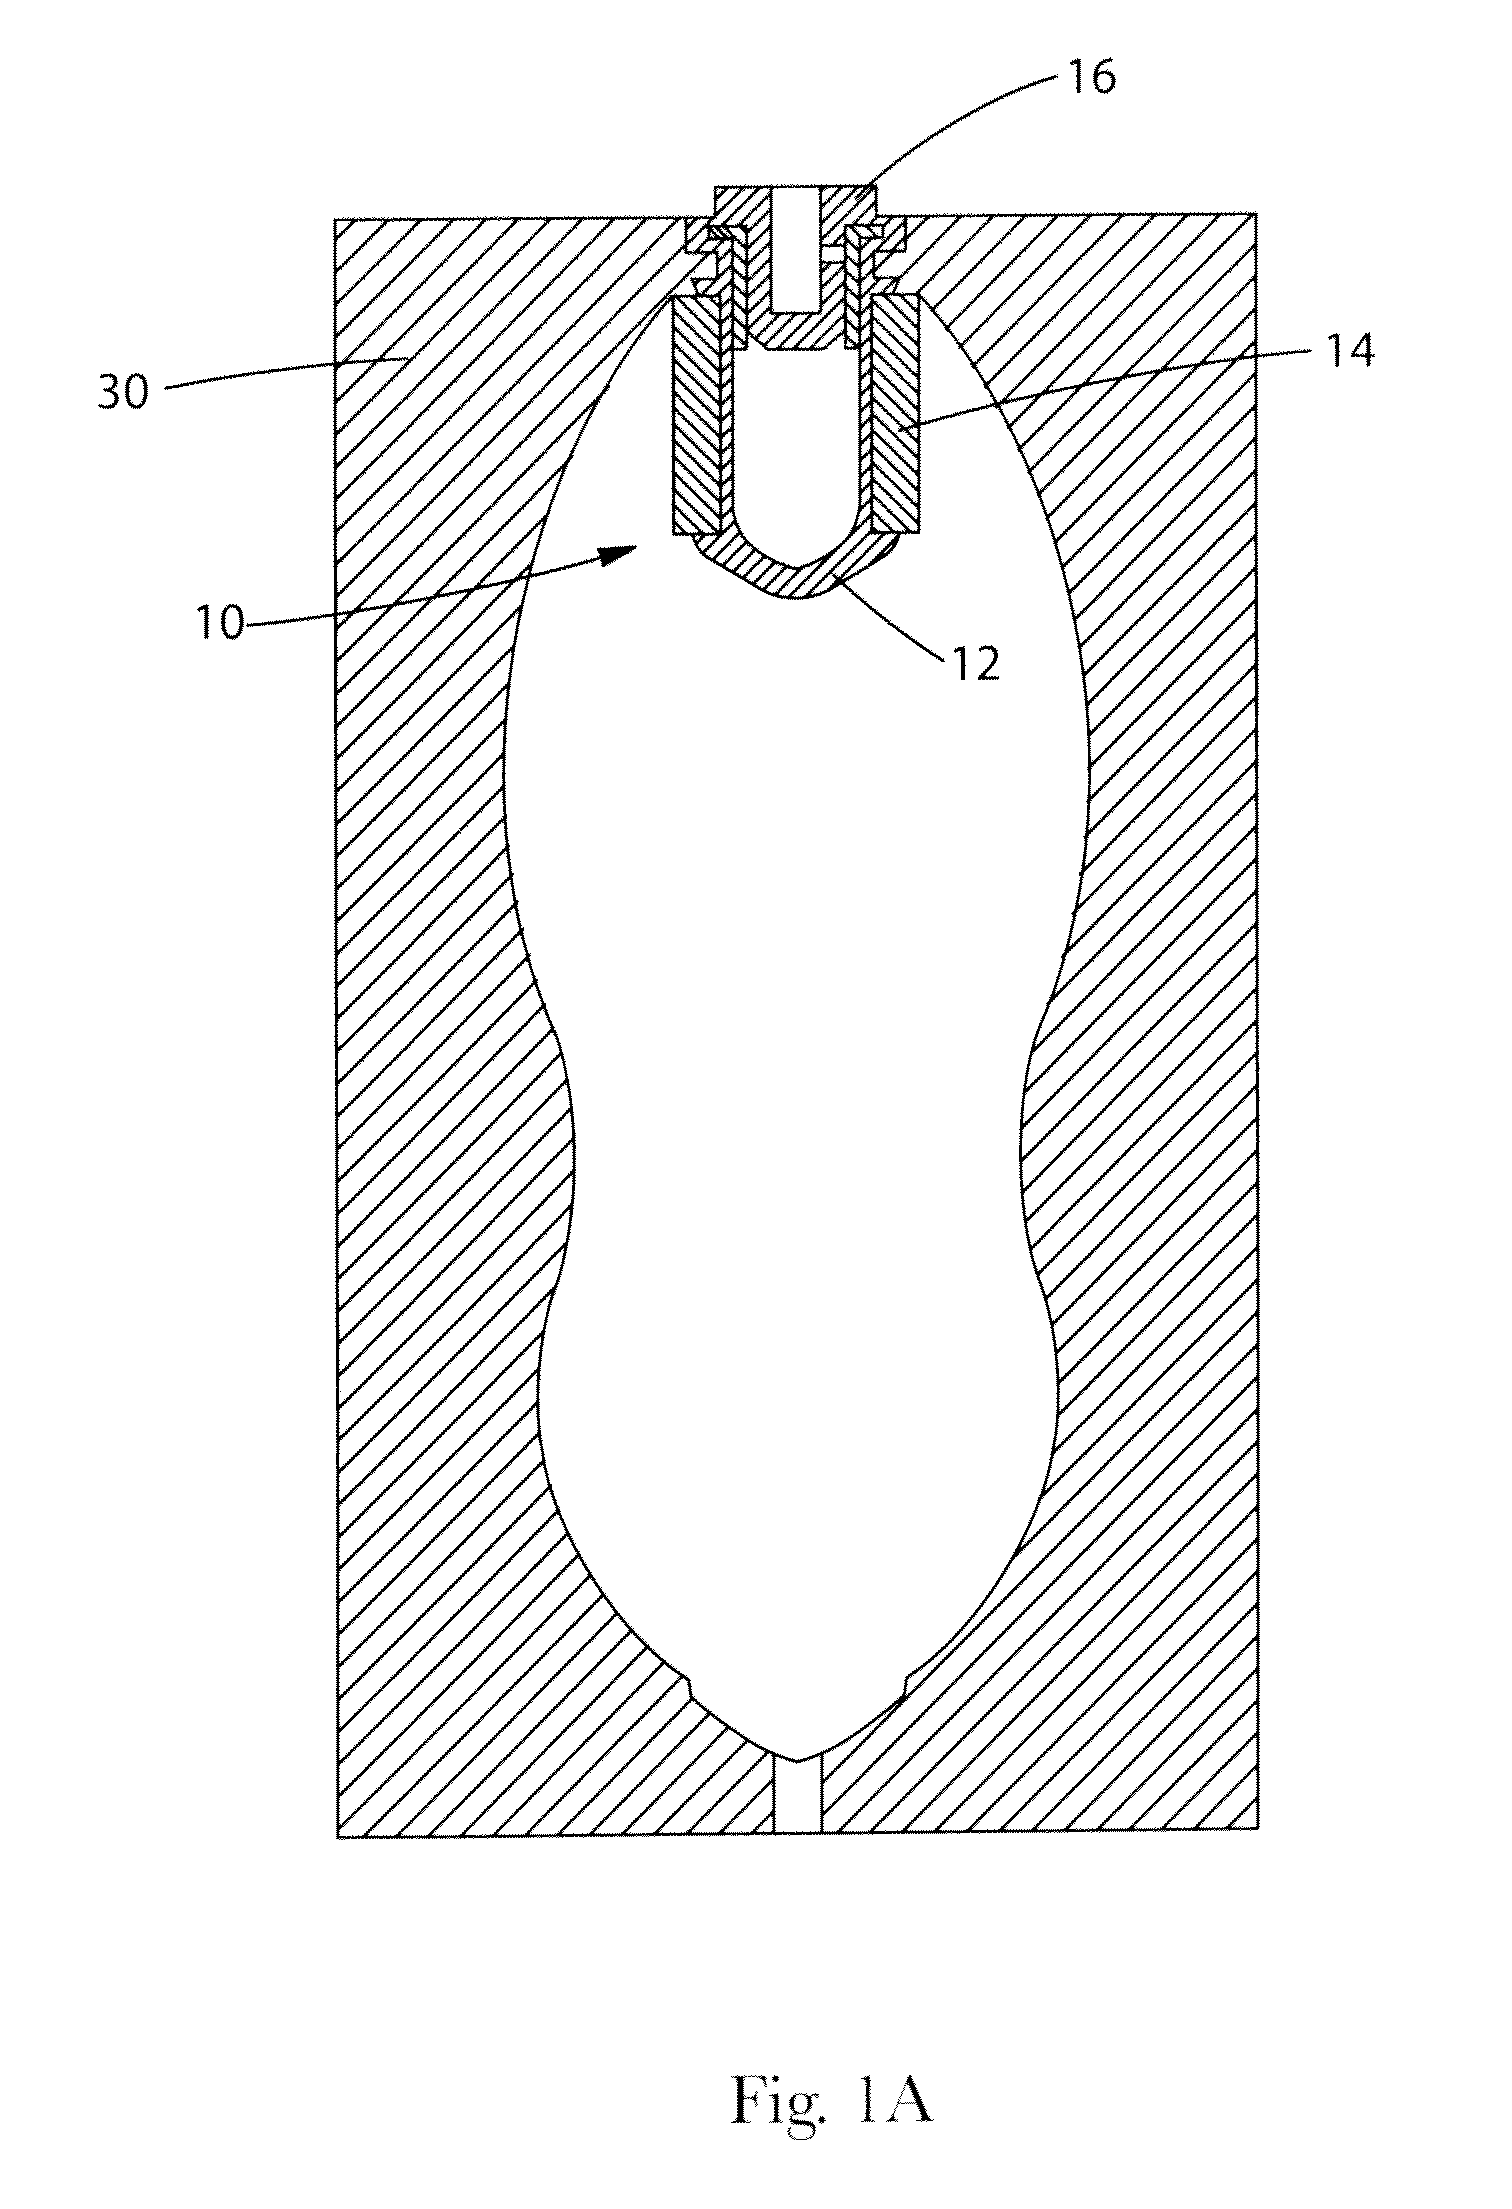 Multi-chamber material dispensing system and method for making same